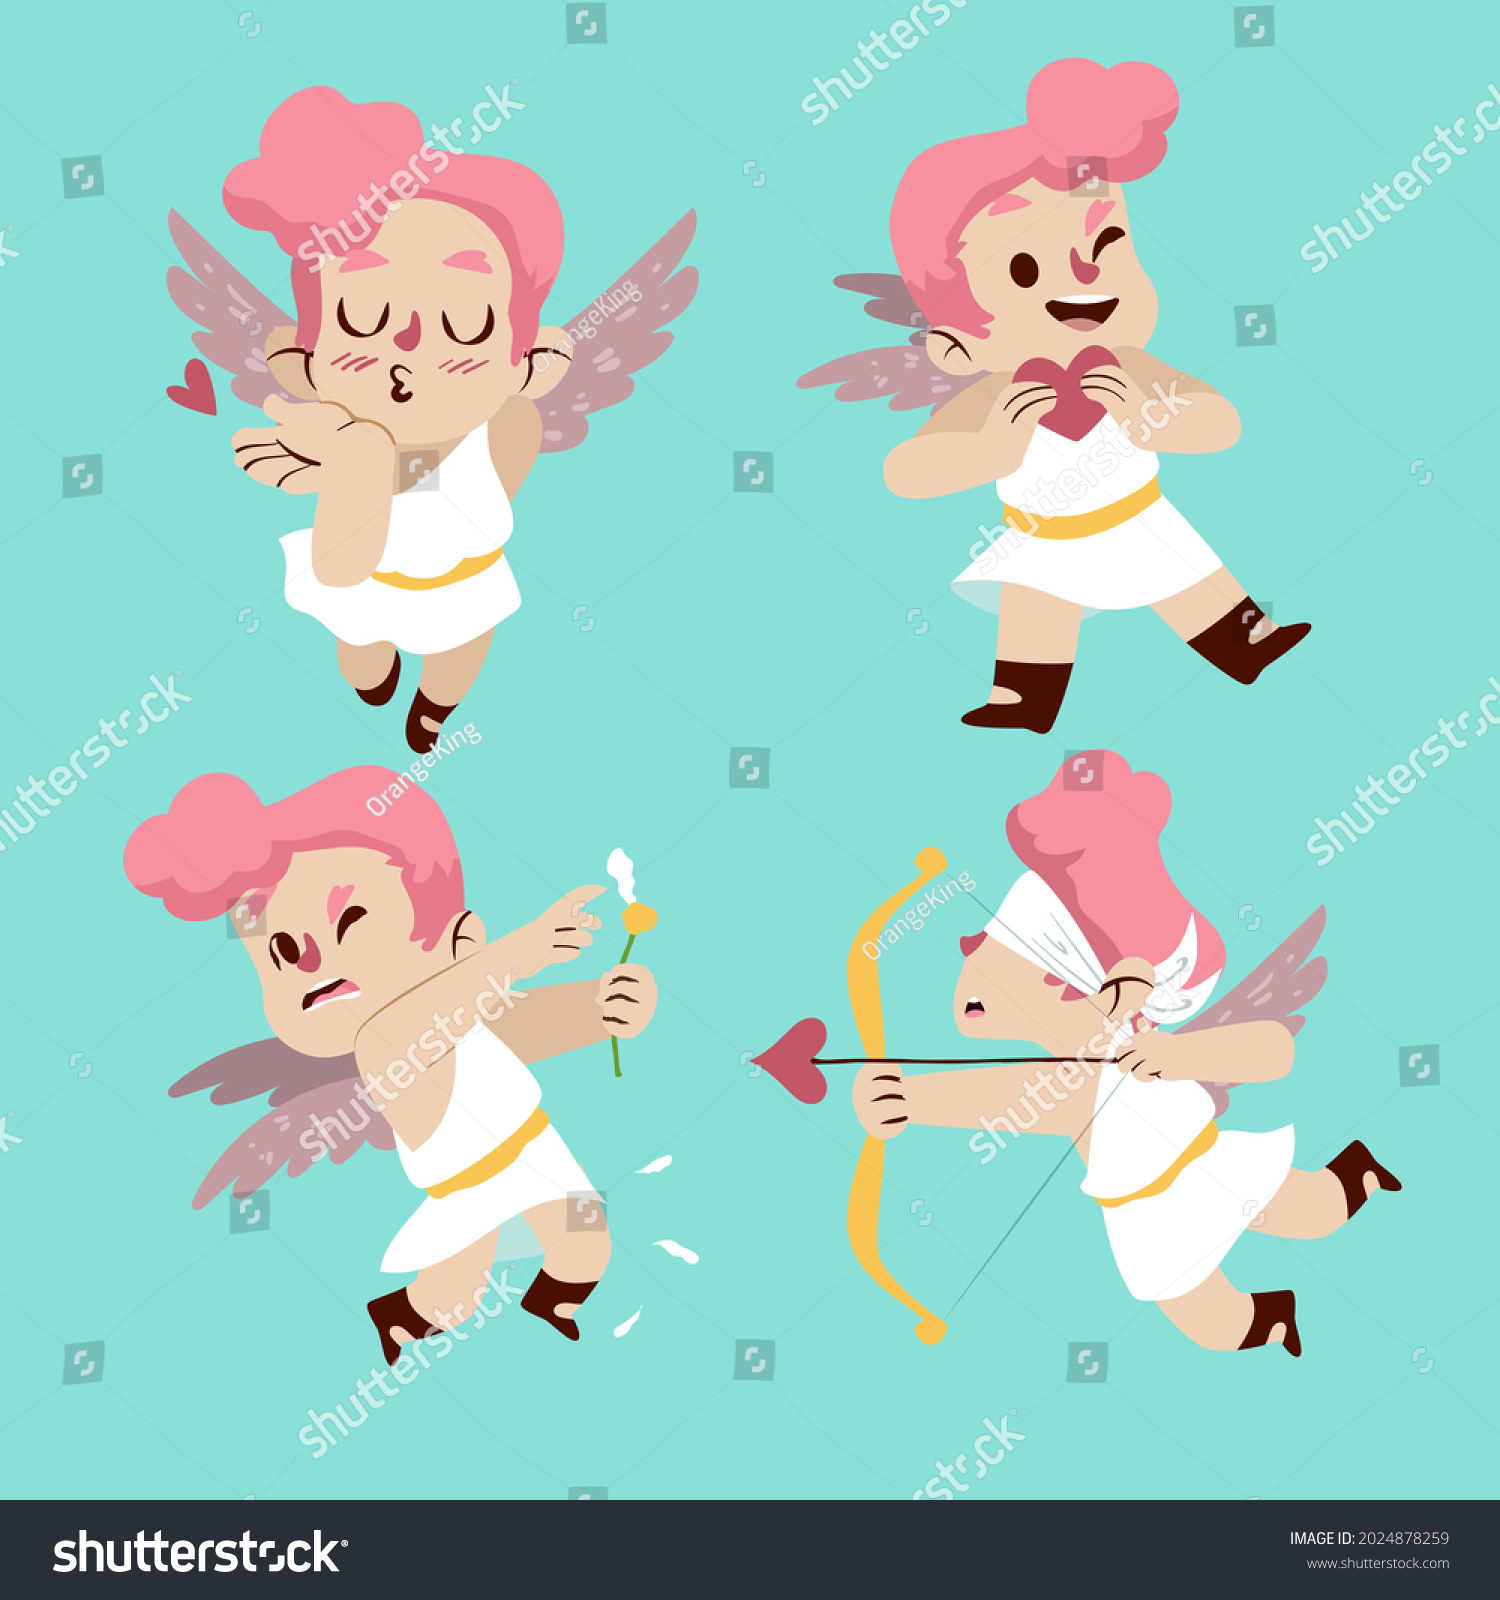 Cartoon Cupid Character Collection Angel Heart Stock Vector Royalty Free 2024878259 Shutterstock 2357